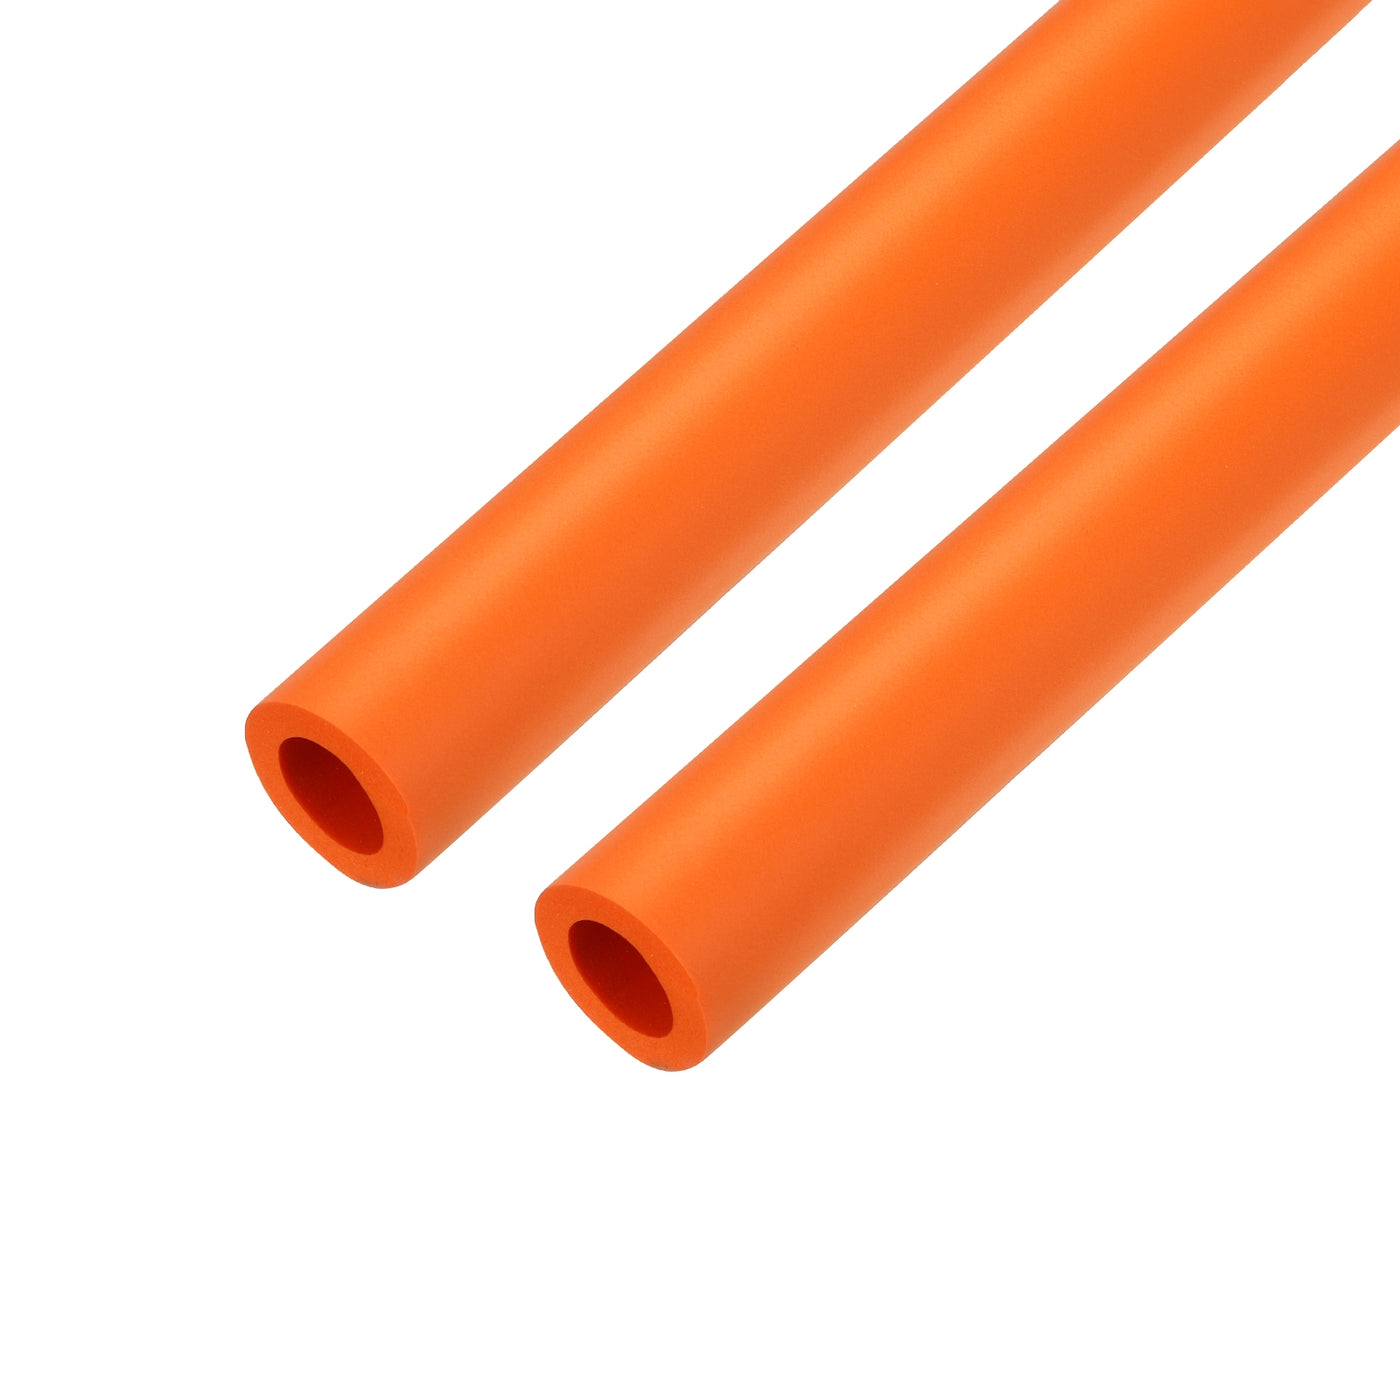 uxcell Uxcell 2pcs 3.3ft Pipe Insulation Tube 18mm ID 30mm OD Foam Tubing for Handle Grip Support, Orange